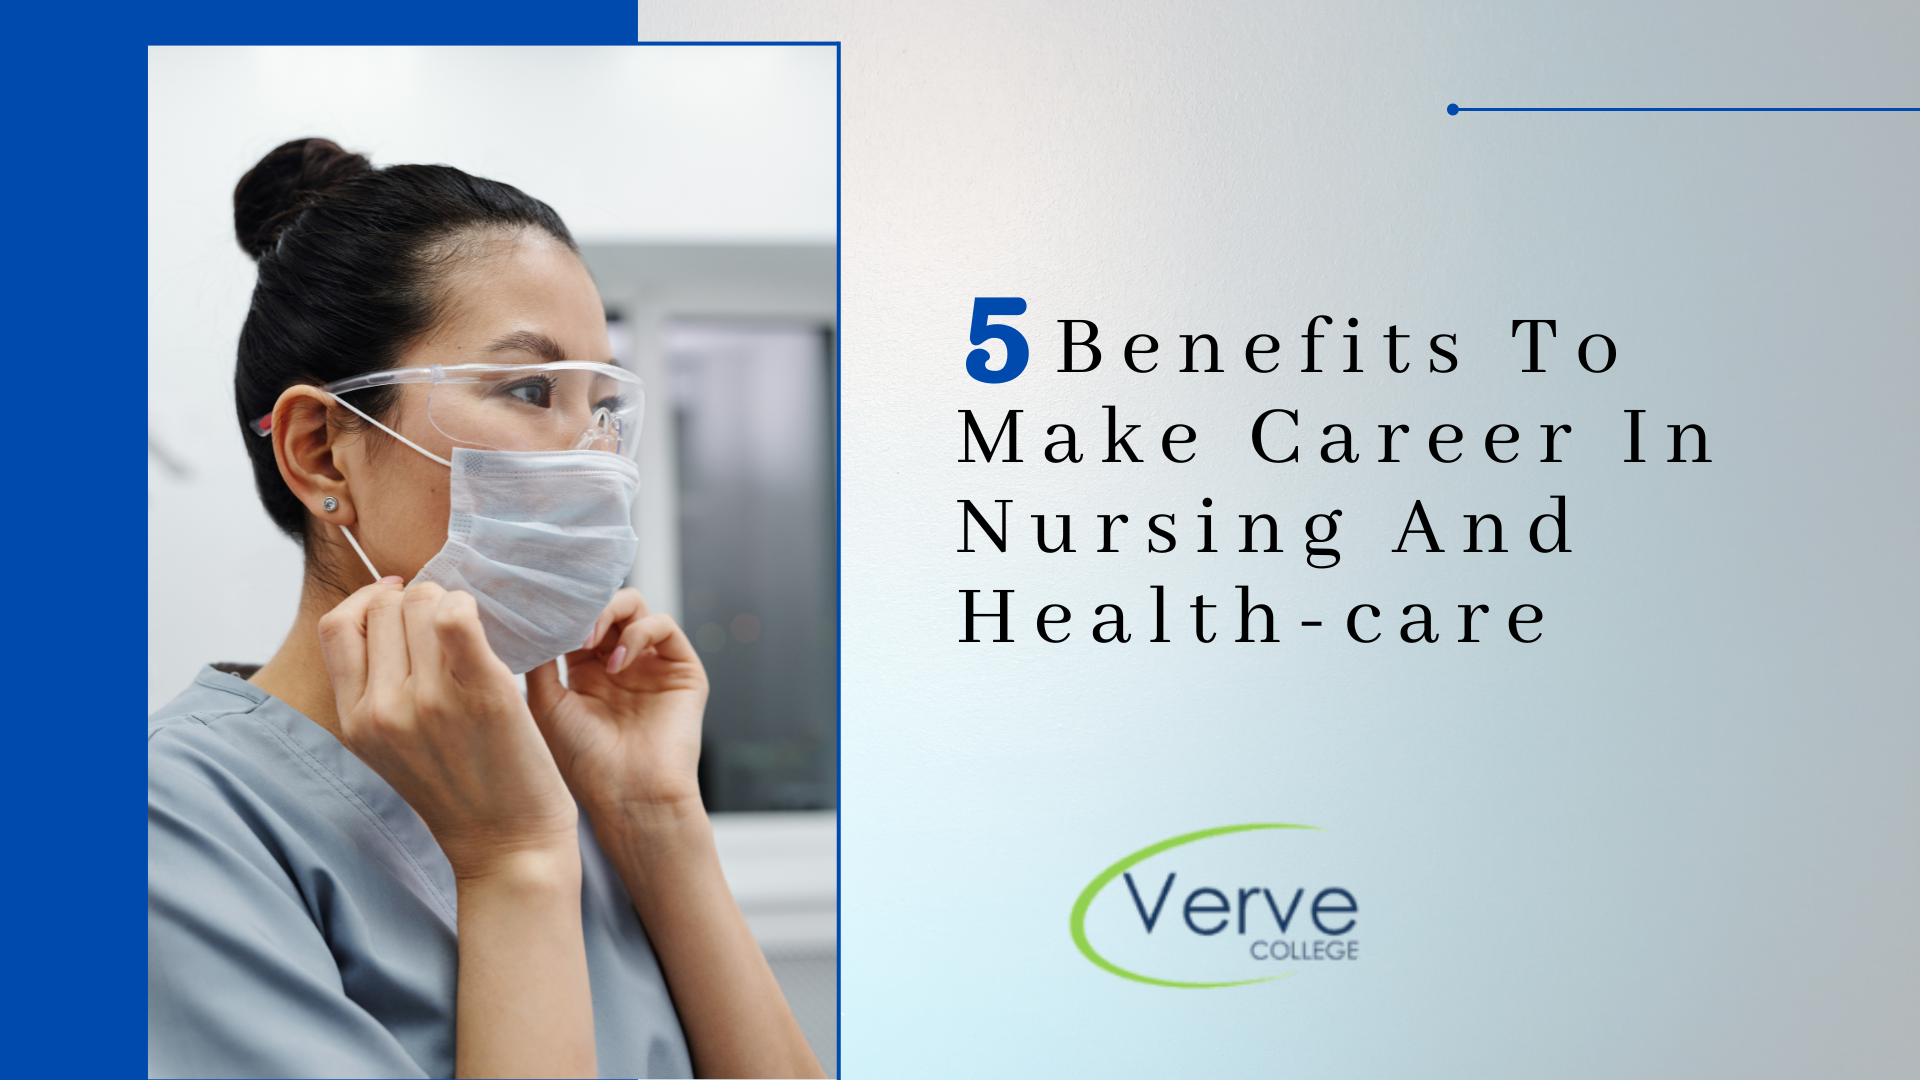 5 Benefits To Make a Career In Nursing And Health-care